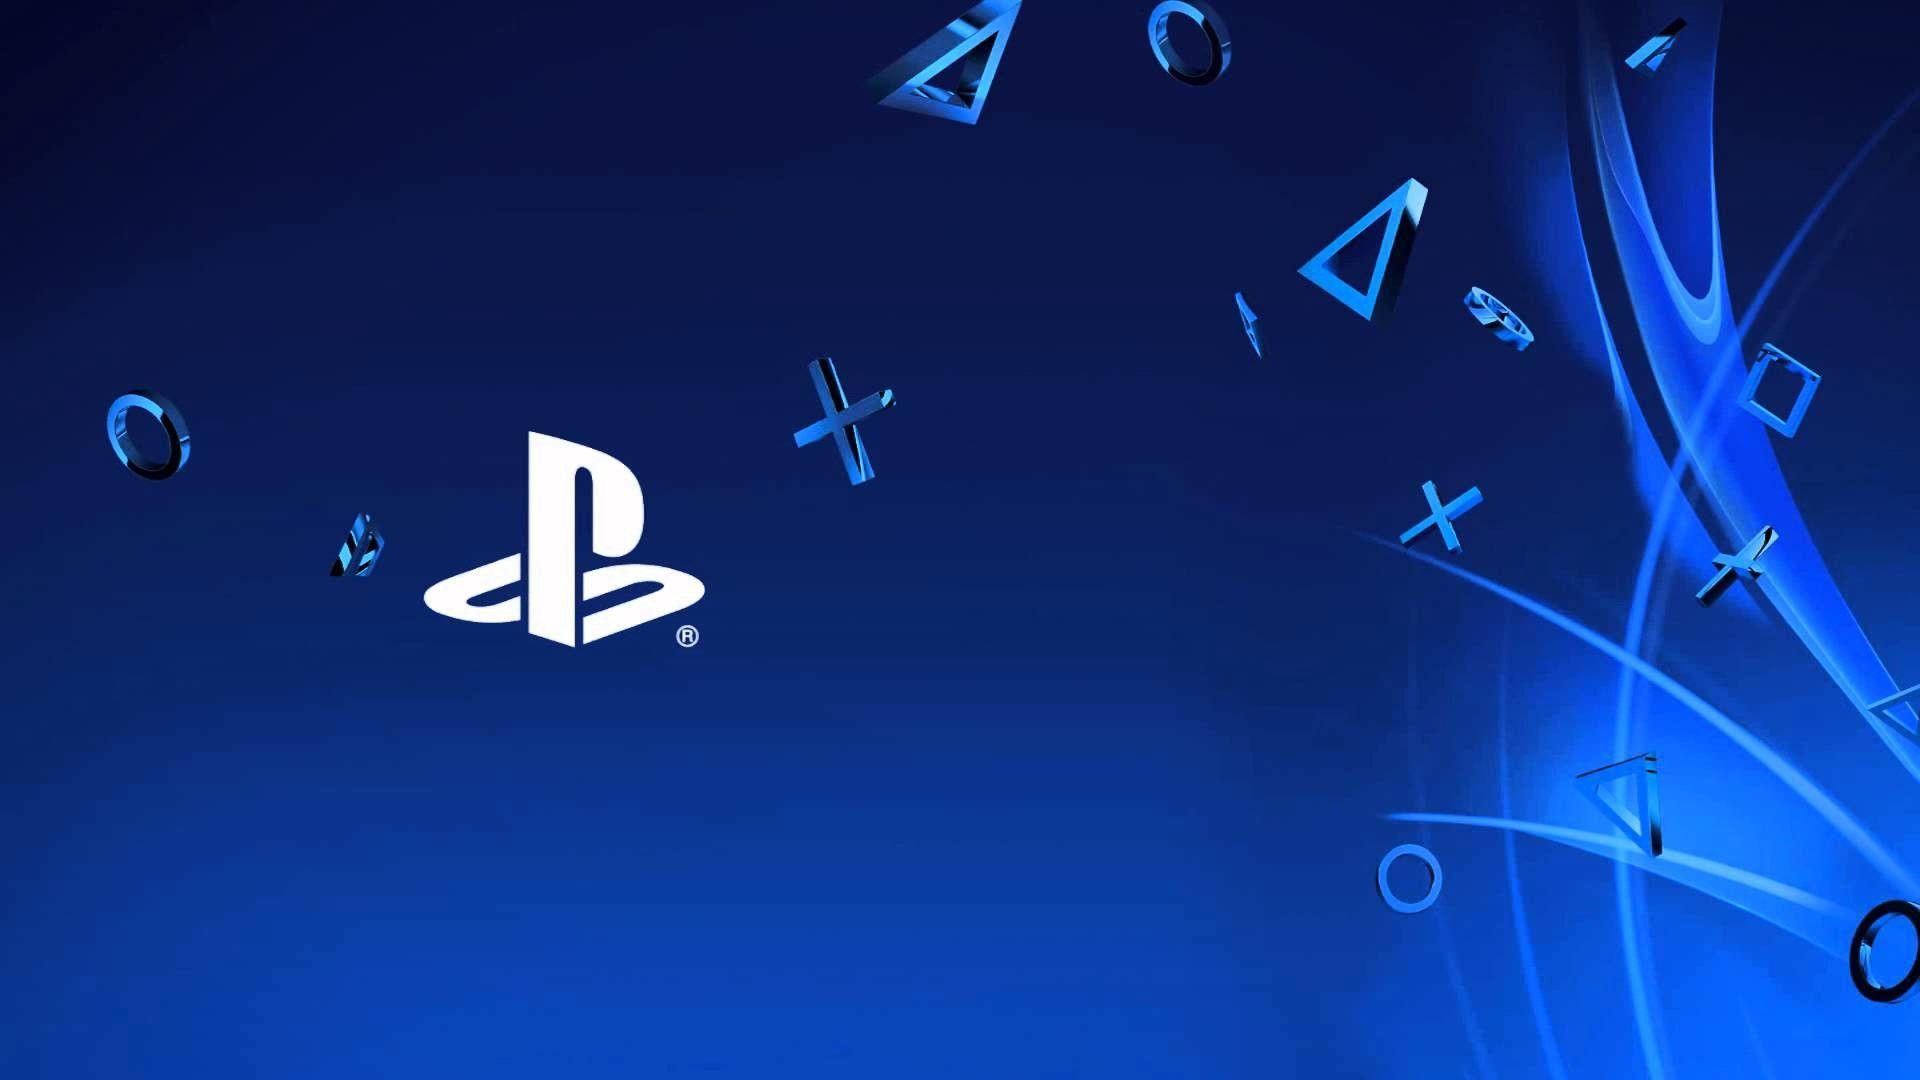 Aesthetic Ps4 Themes Wallpapers